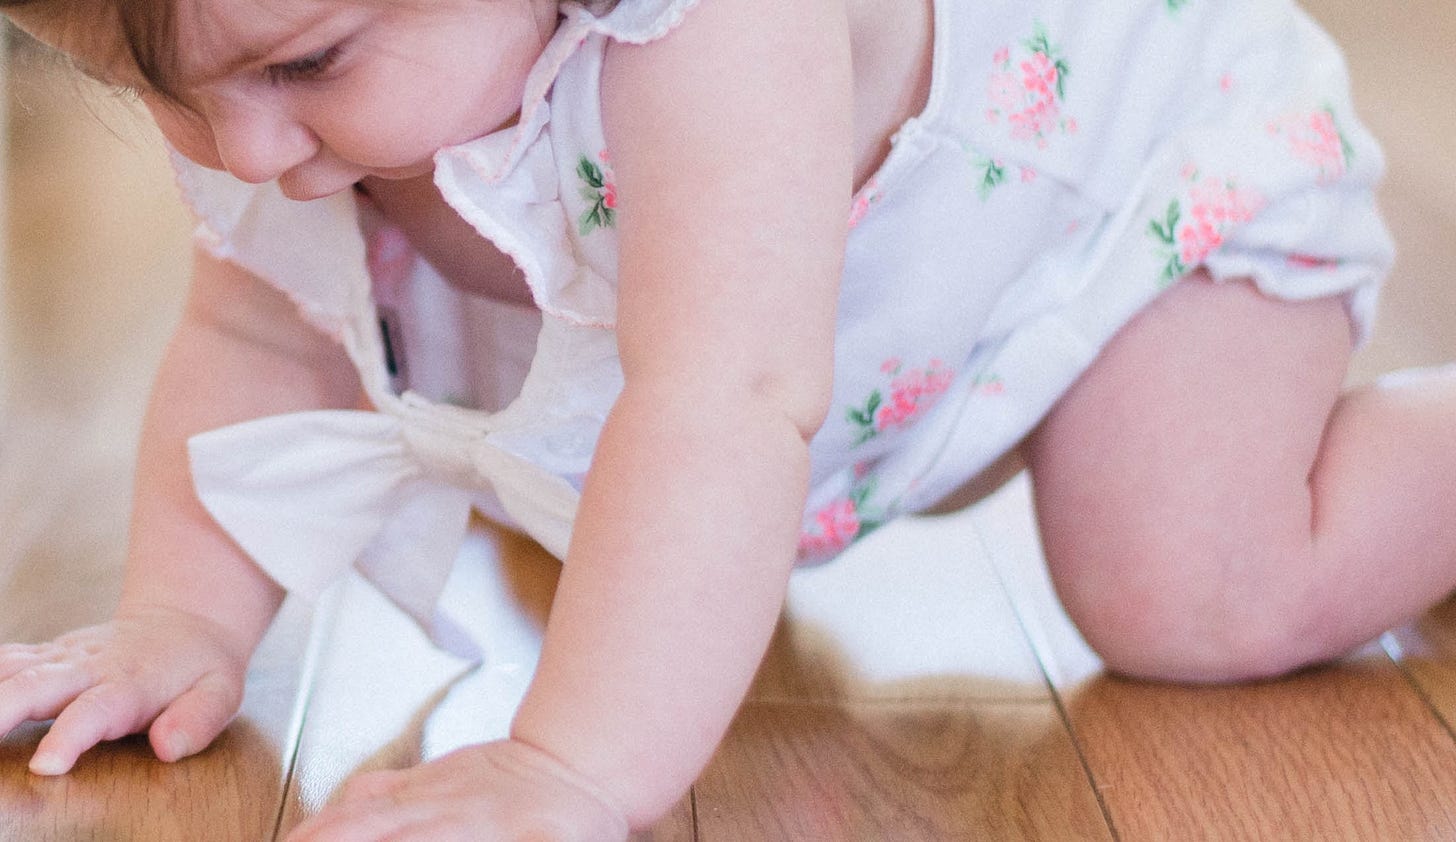 baby girl crawling on wood floor with pudgy wrists and knees